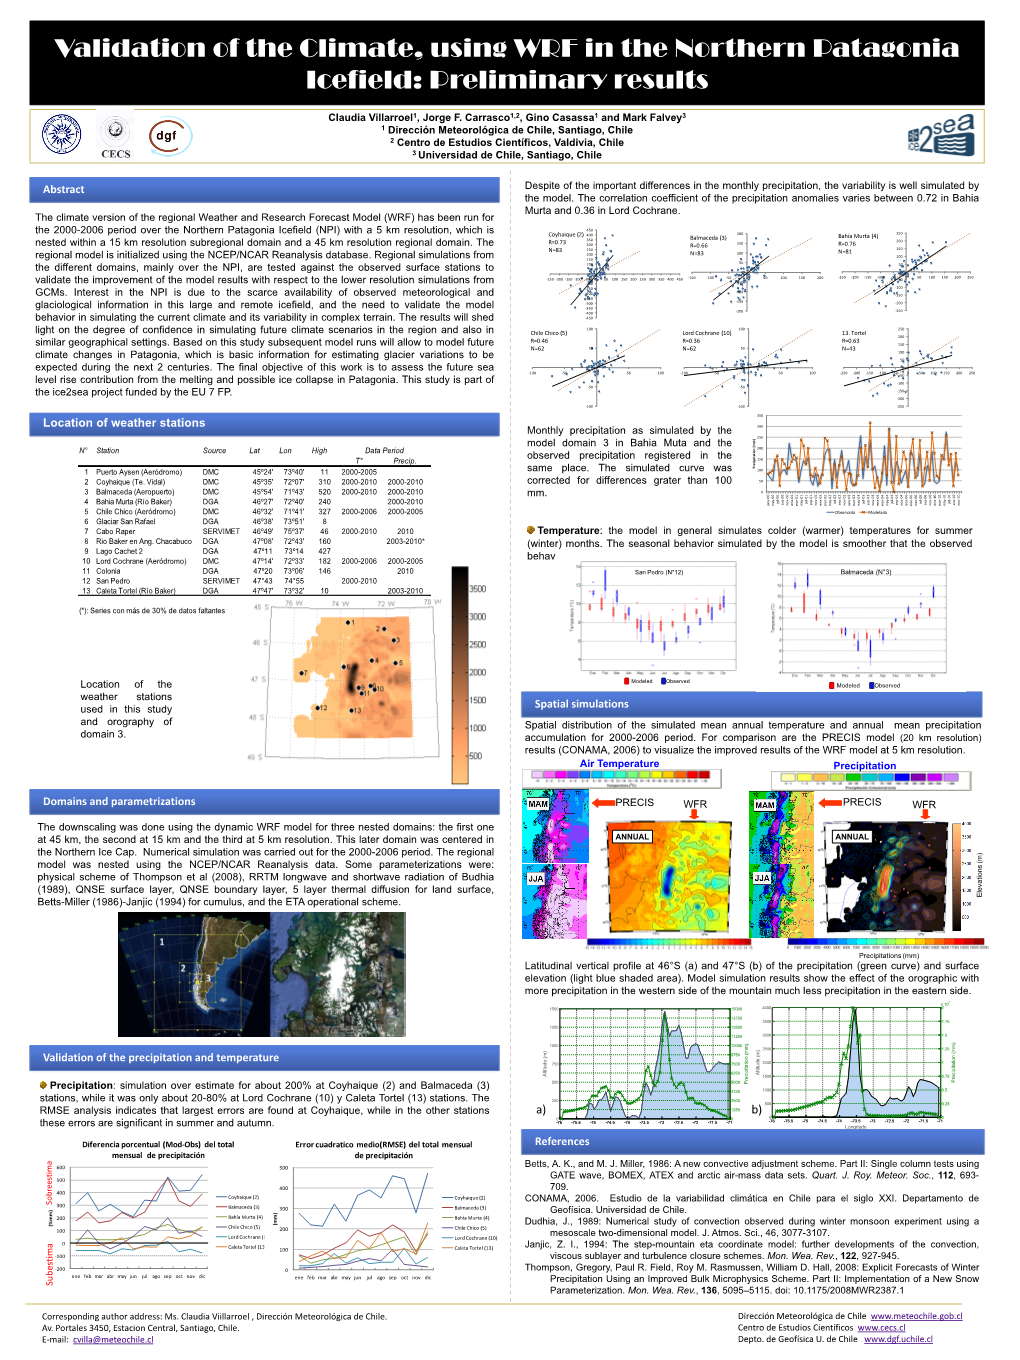 Validation of the Climate Version of the WRF in the Northern Patagonia